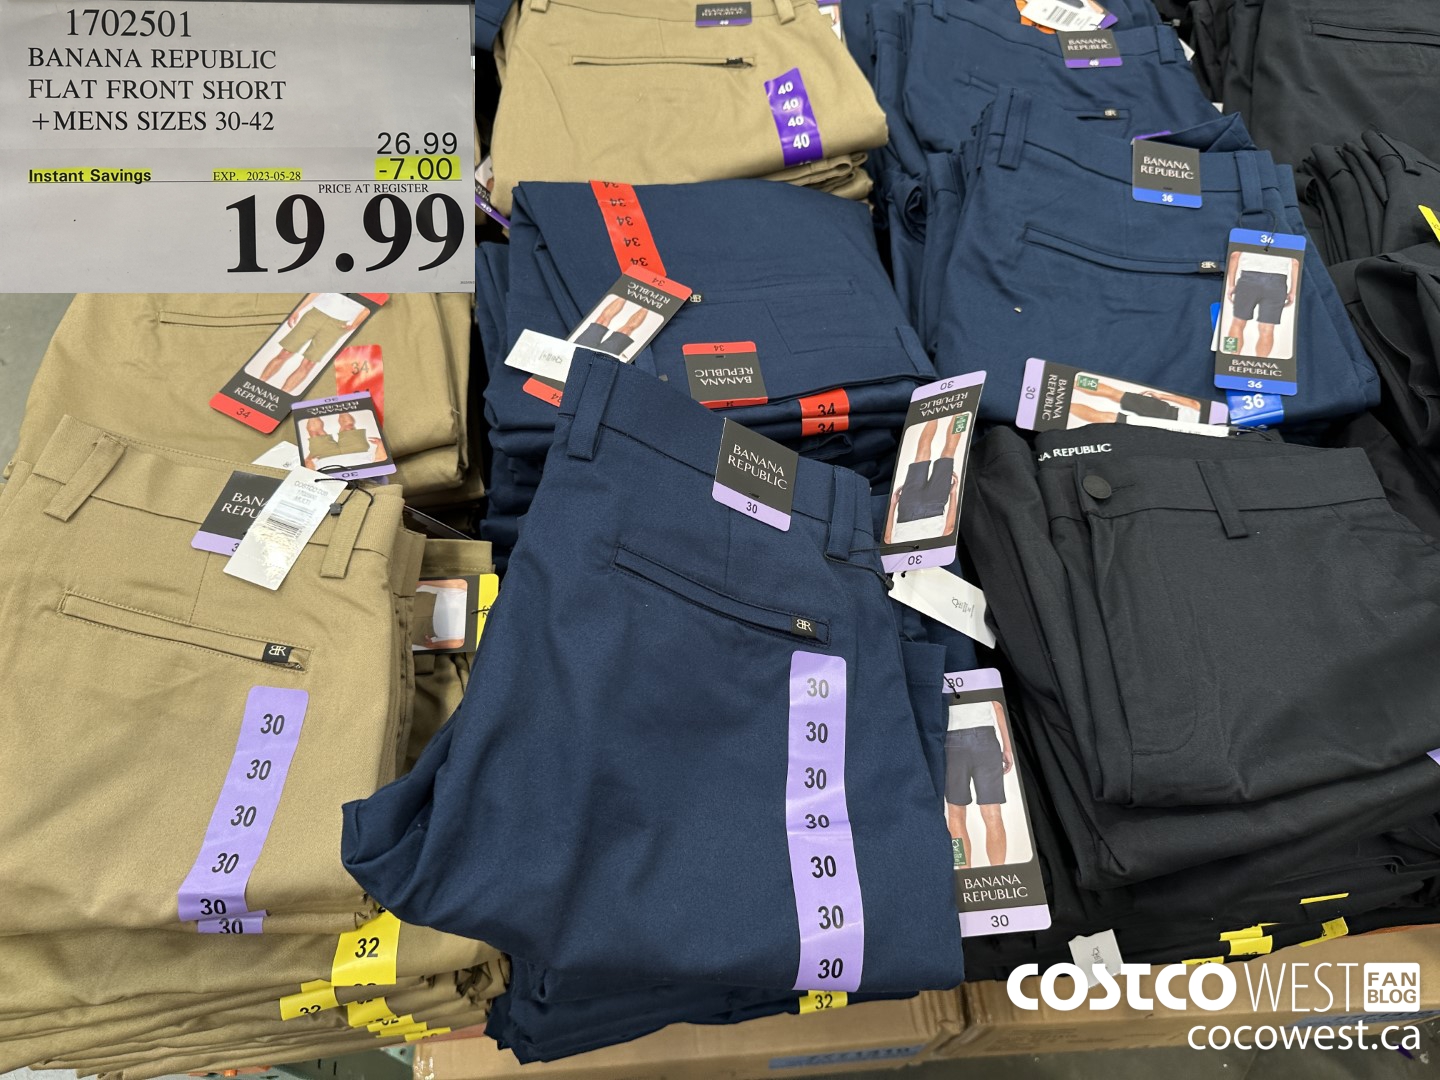 Costco's Best Clothing Brands: Calvin Klein, Banana Republic, and More